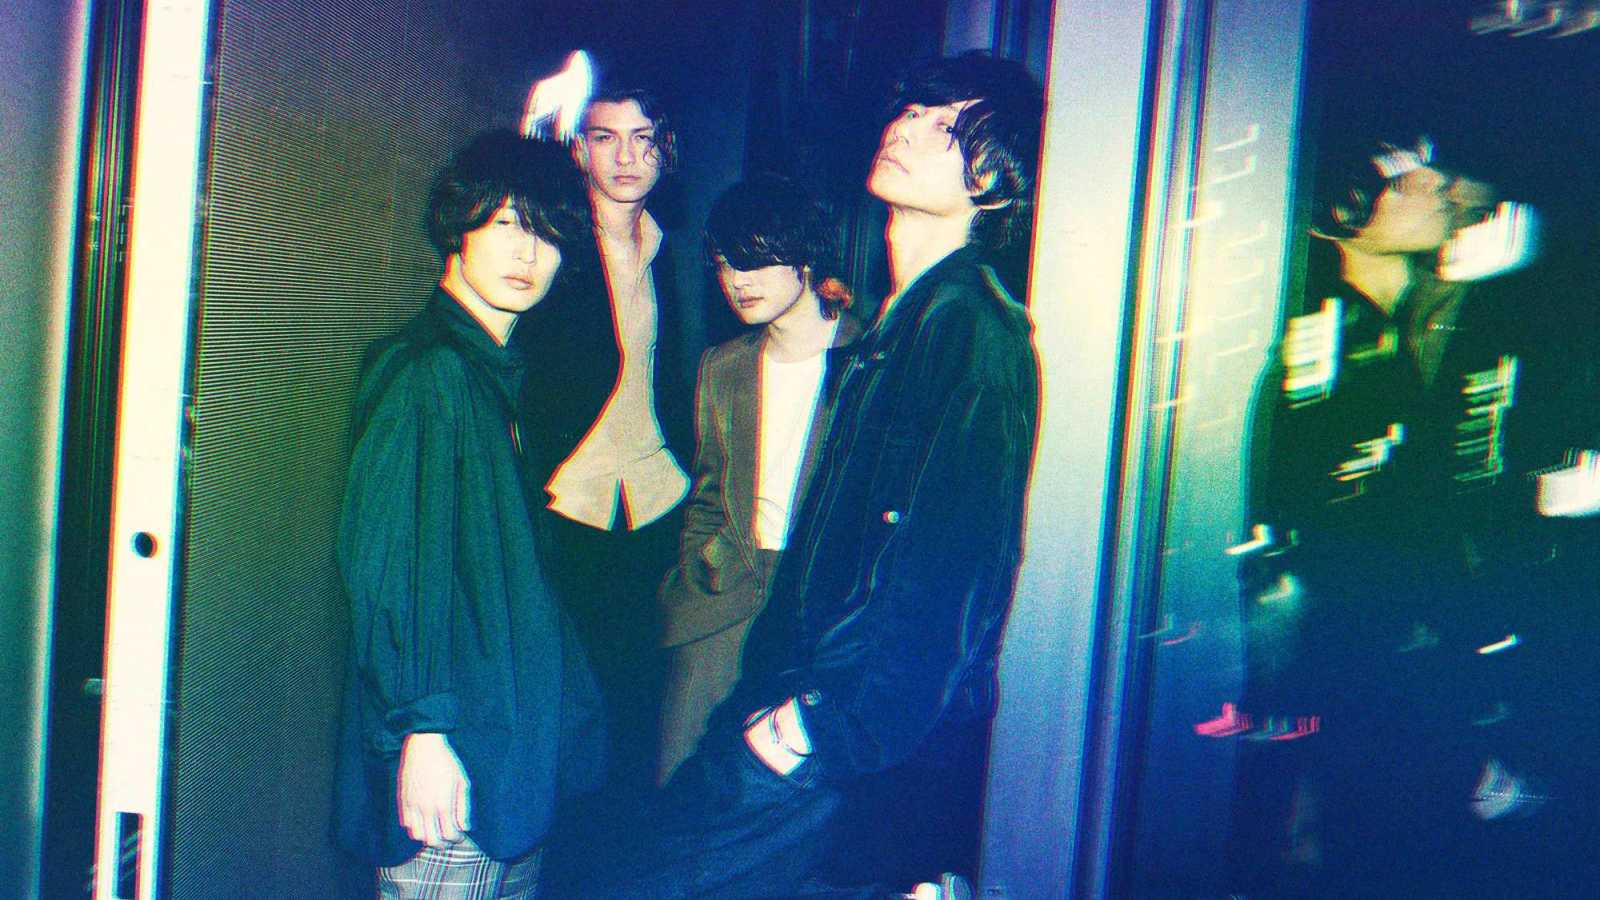 Ib Riad rejoint [Alexandros] © [Alexandros]. All rights reserved.